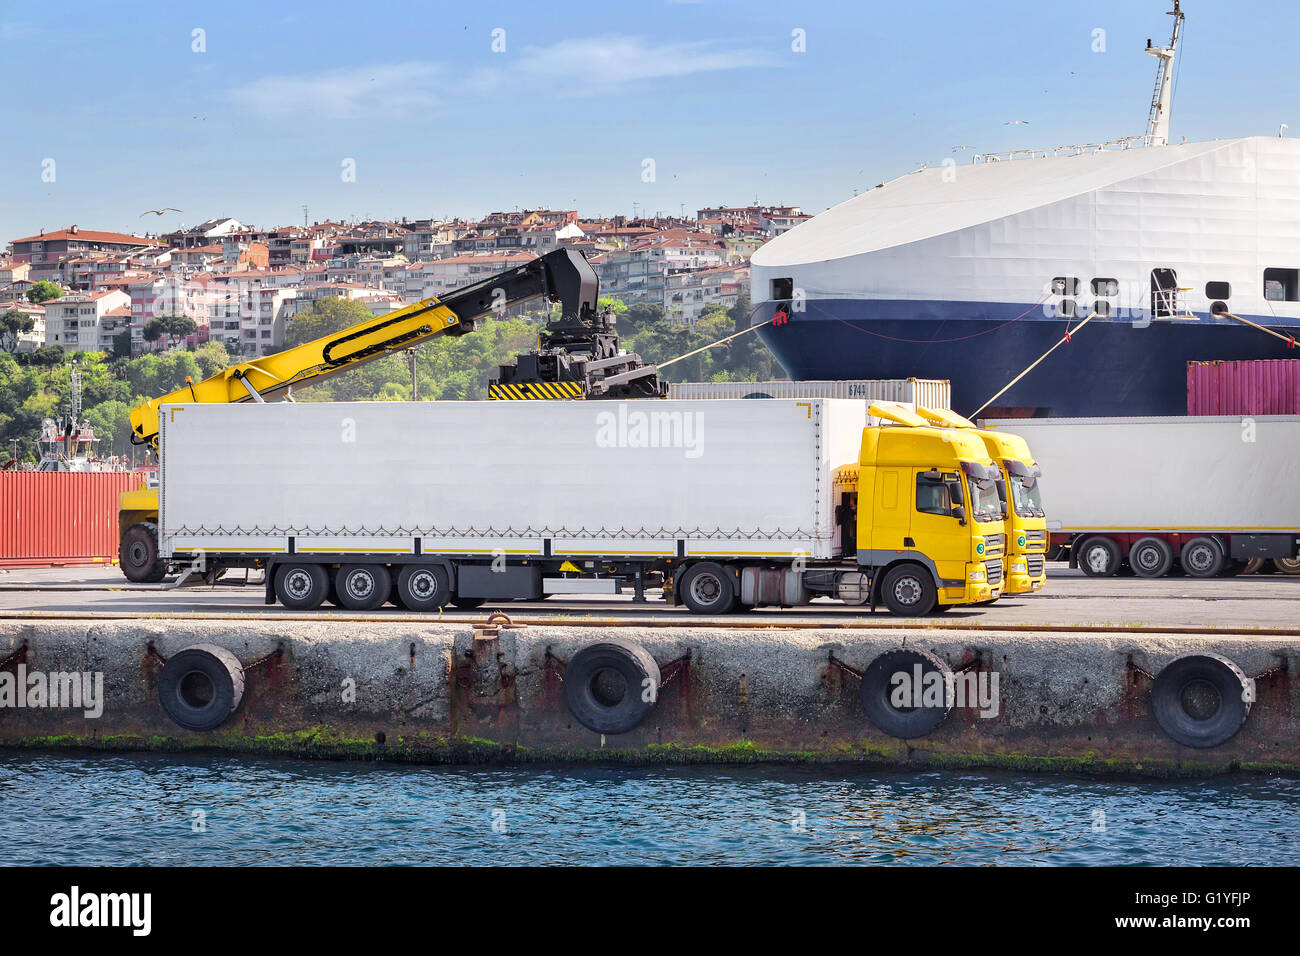 Truck unloading in a port on the Sea Stock Photo